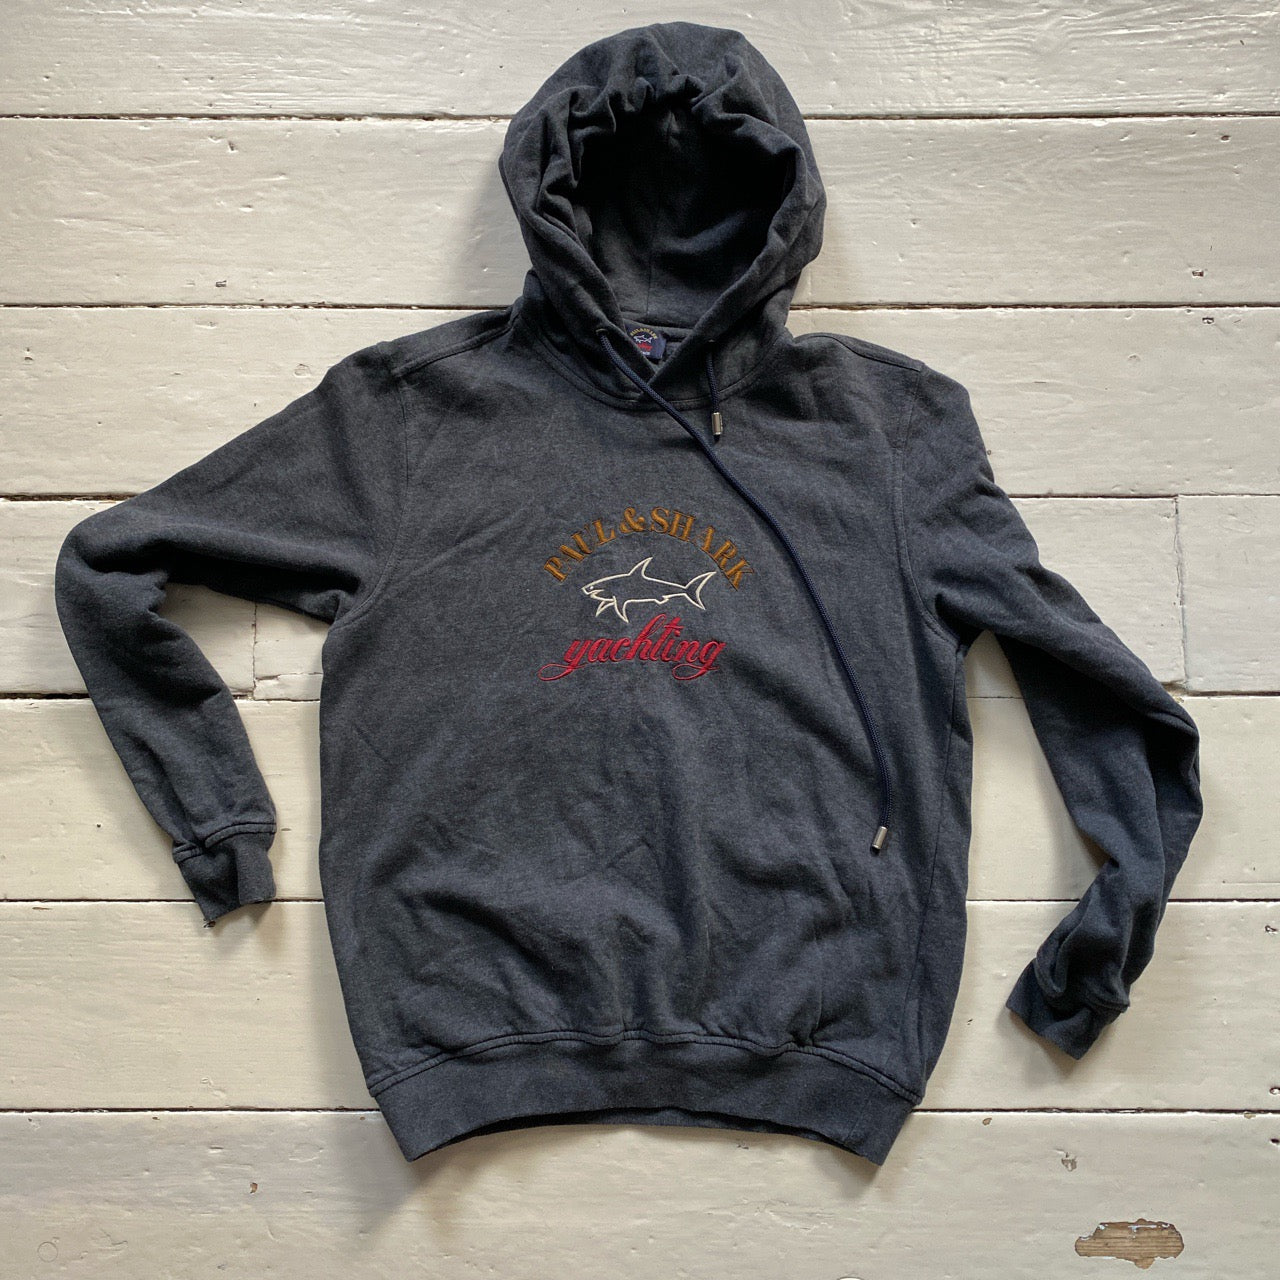 Paul and Shark Yachting Grey Hoodie (Large)